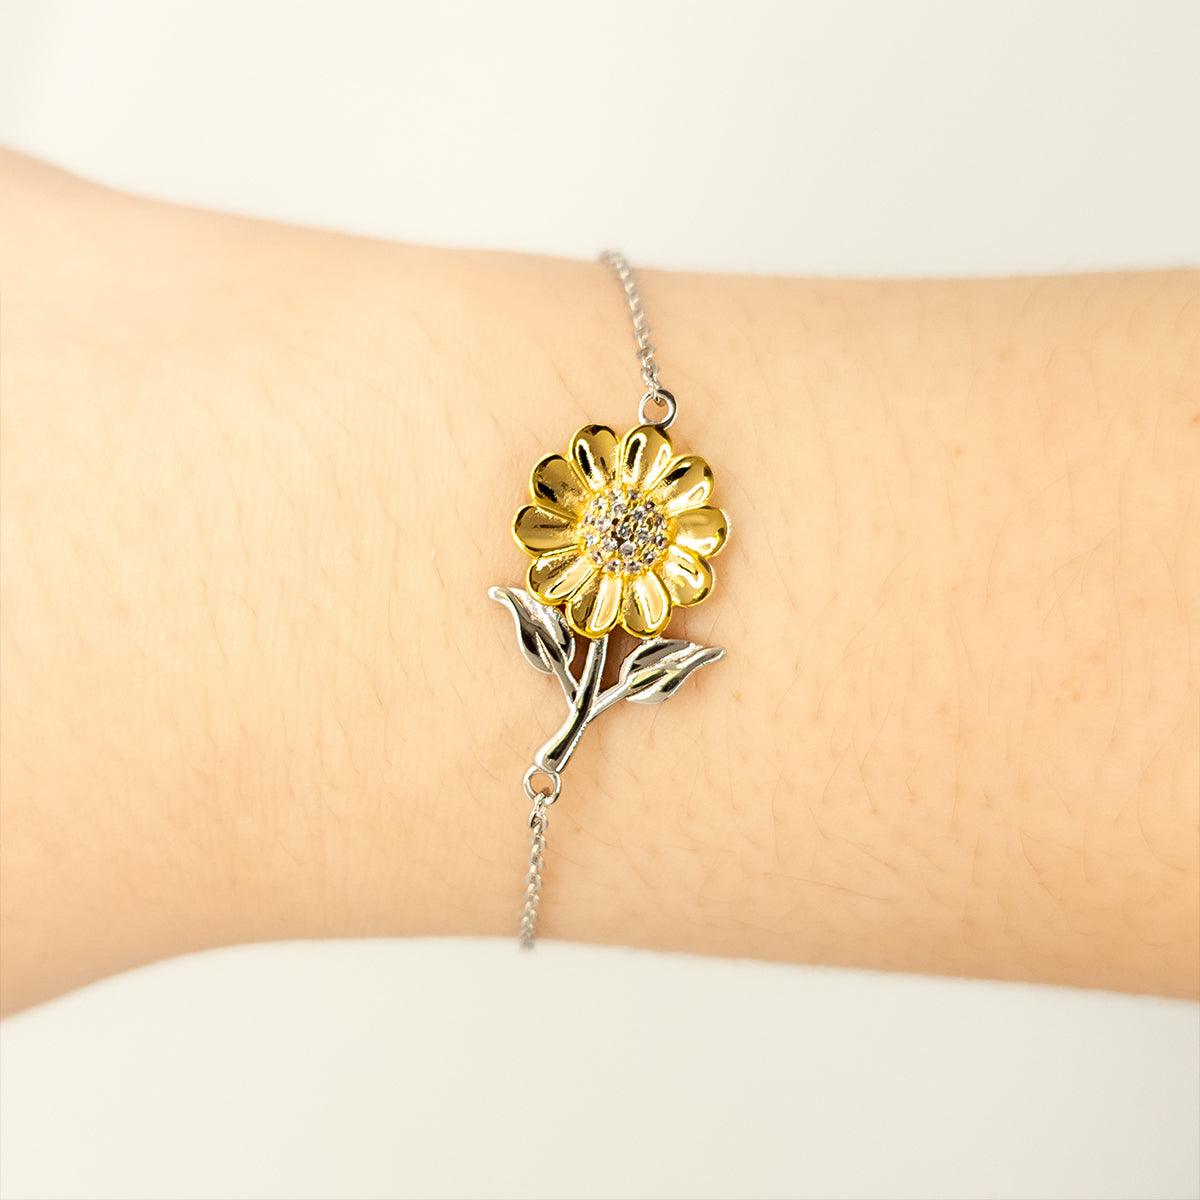 President Sunflower Bracelet - Thanks for being who you are - Birthday Christmas Jewelry Gifts Coworkers Colleague Boss - Mallard Moon Gift Shop